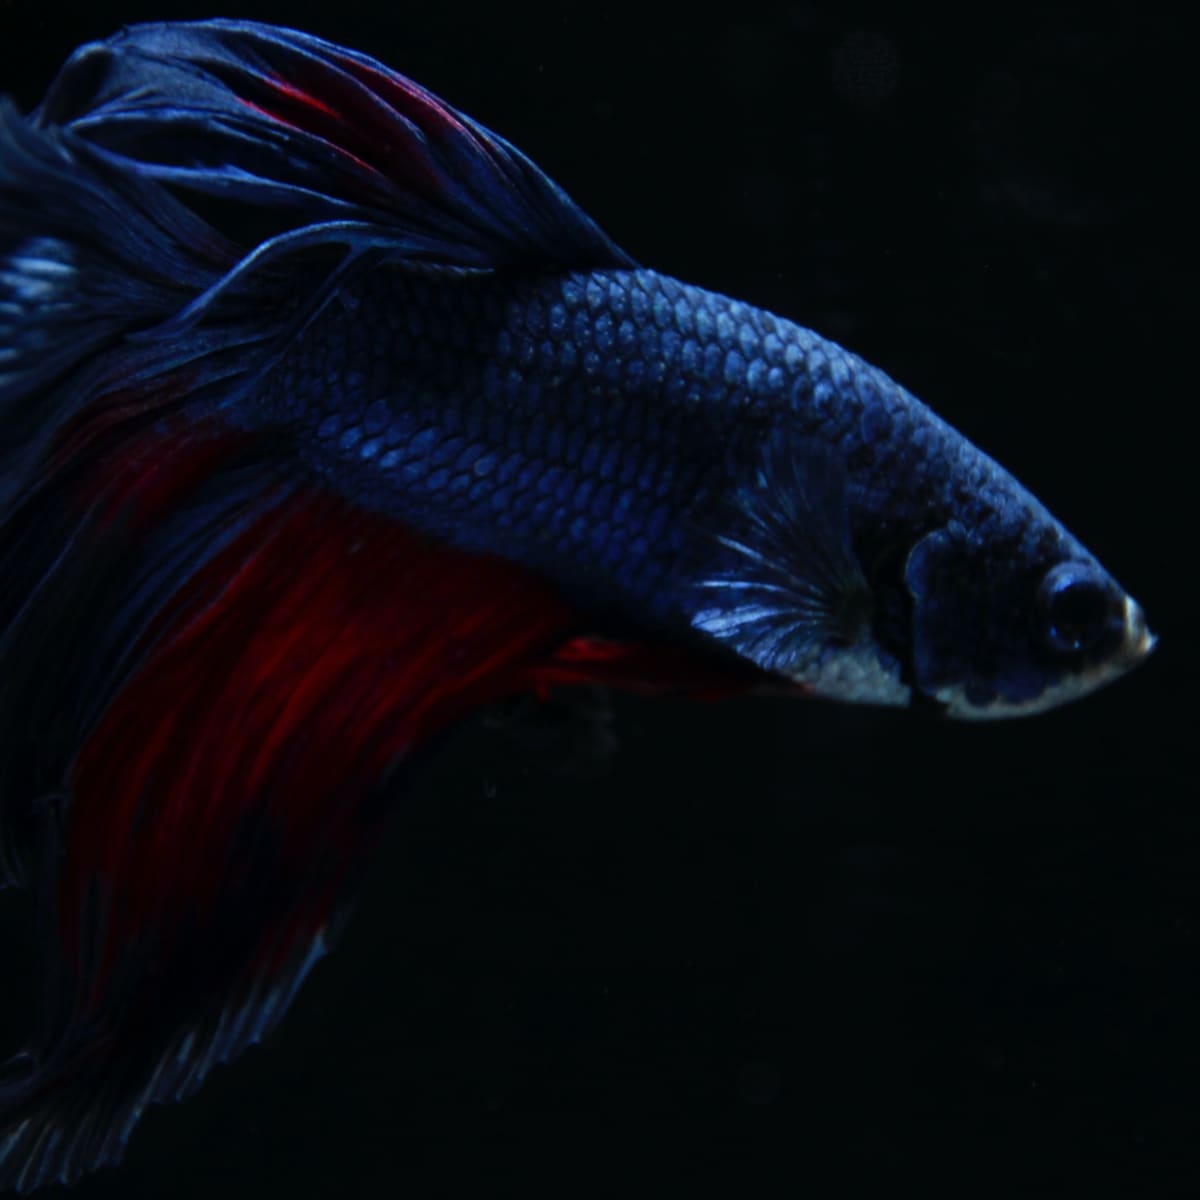 The Complete Betta Fish Care Guide for Beginners - PetHelpful